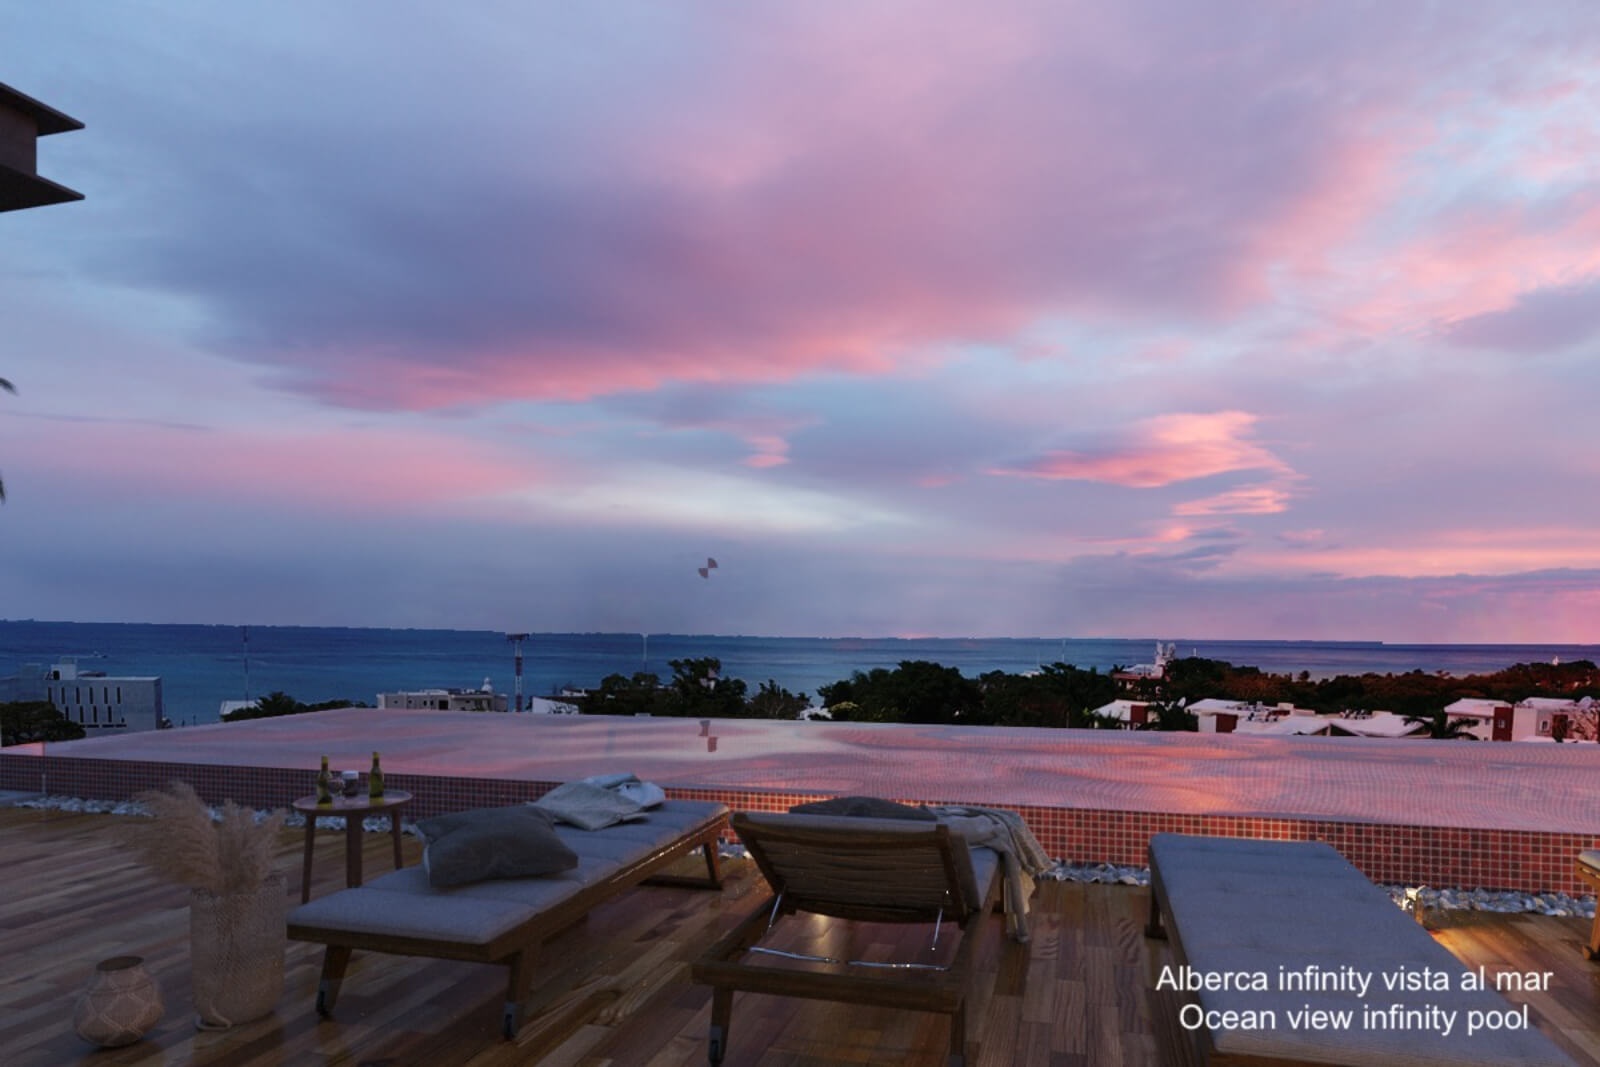 Ocean view rooftop apartment with private pool for sale in Cozumel